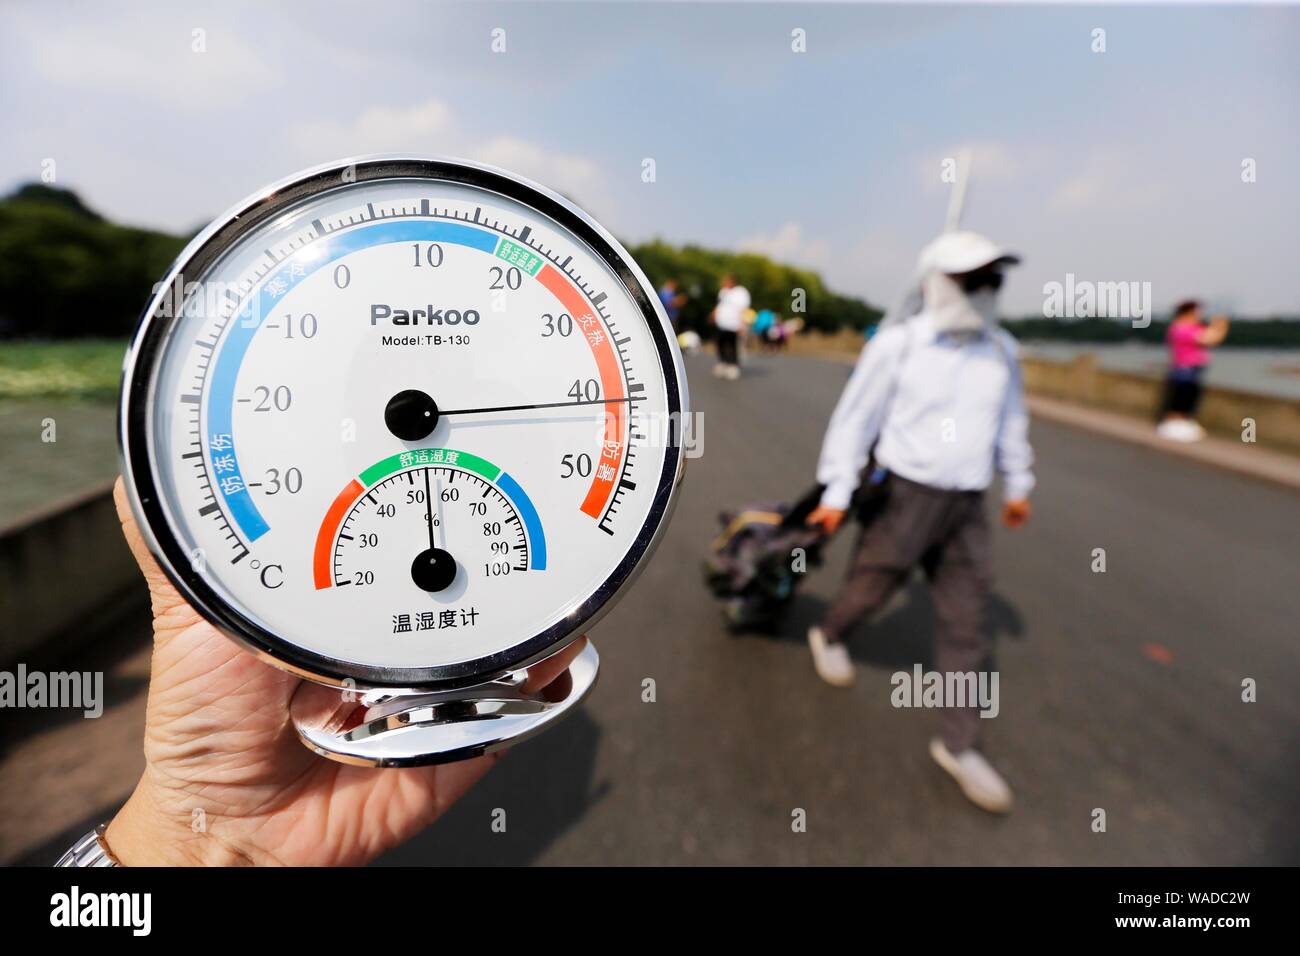 A local resident displays a thermometer showing the current temperature reaching 40 degrees Celsius on the West Lake scenic spot in Hangzhou city, eas Stock Photo